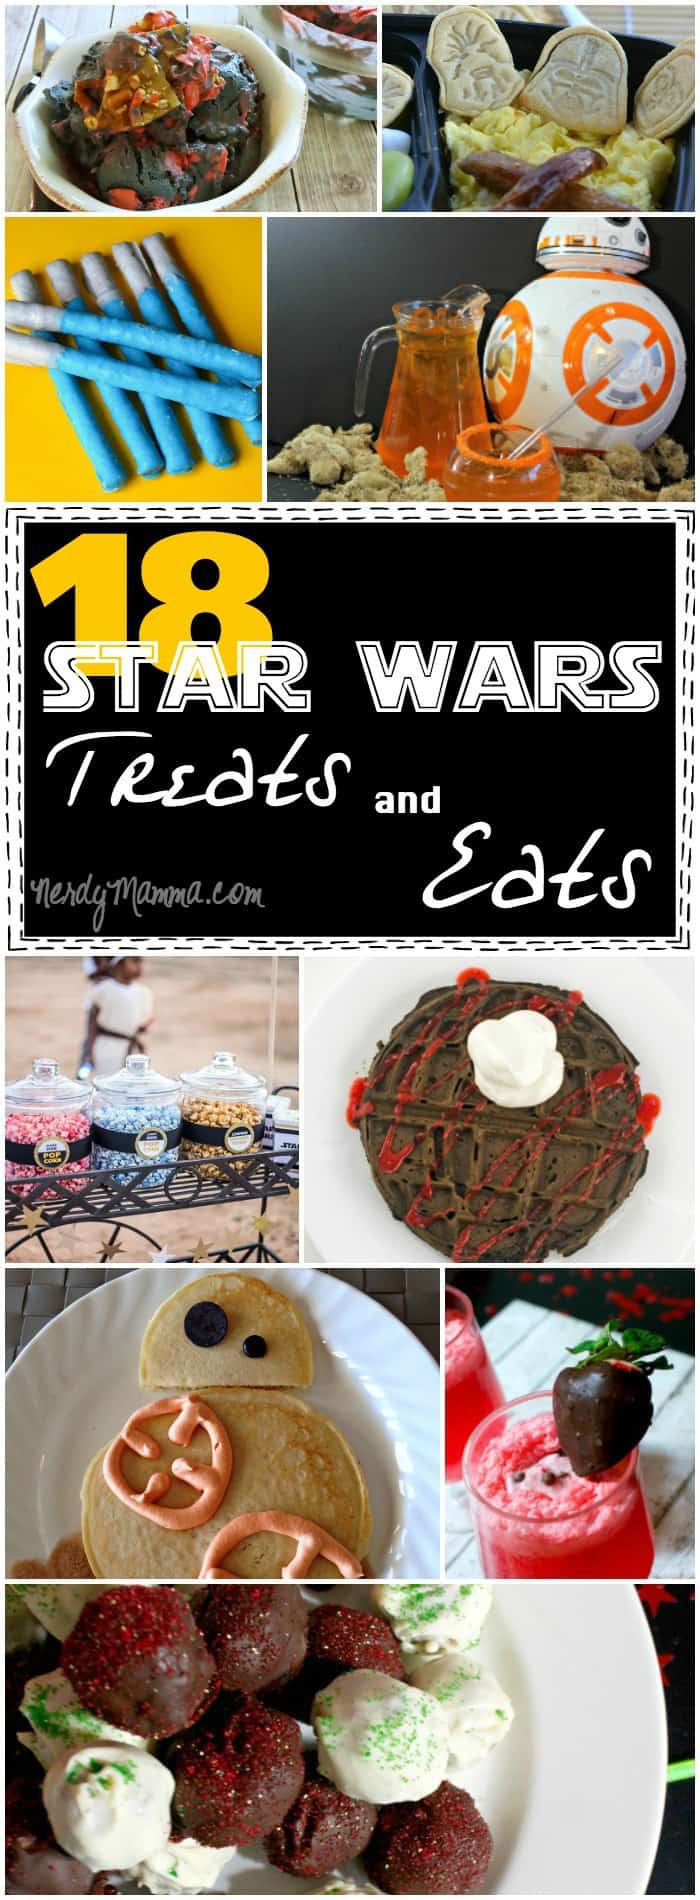 This roundup of 18 Star Wars Treats and Eats has SO MANY awesome ideas! I love that there's a little something for every meal.